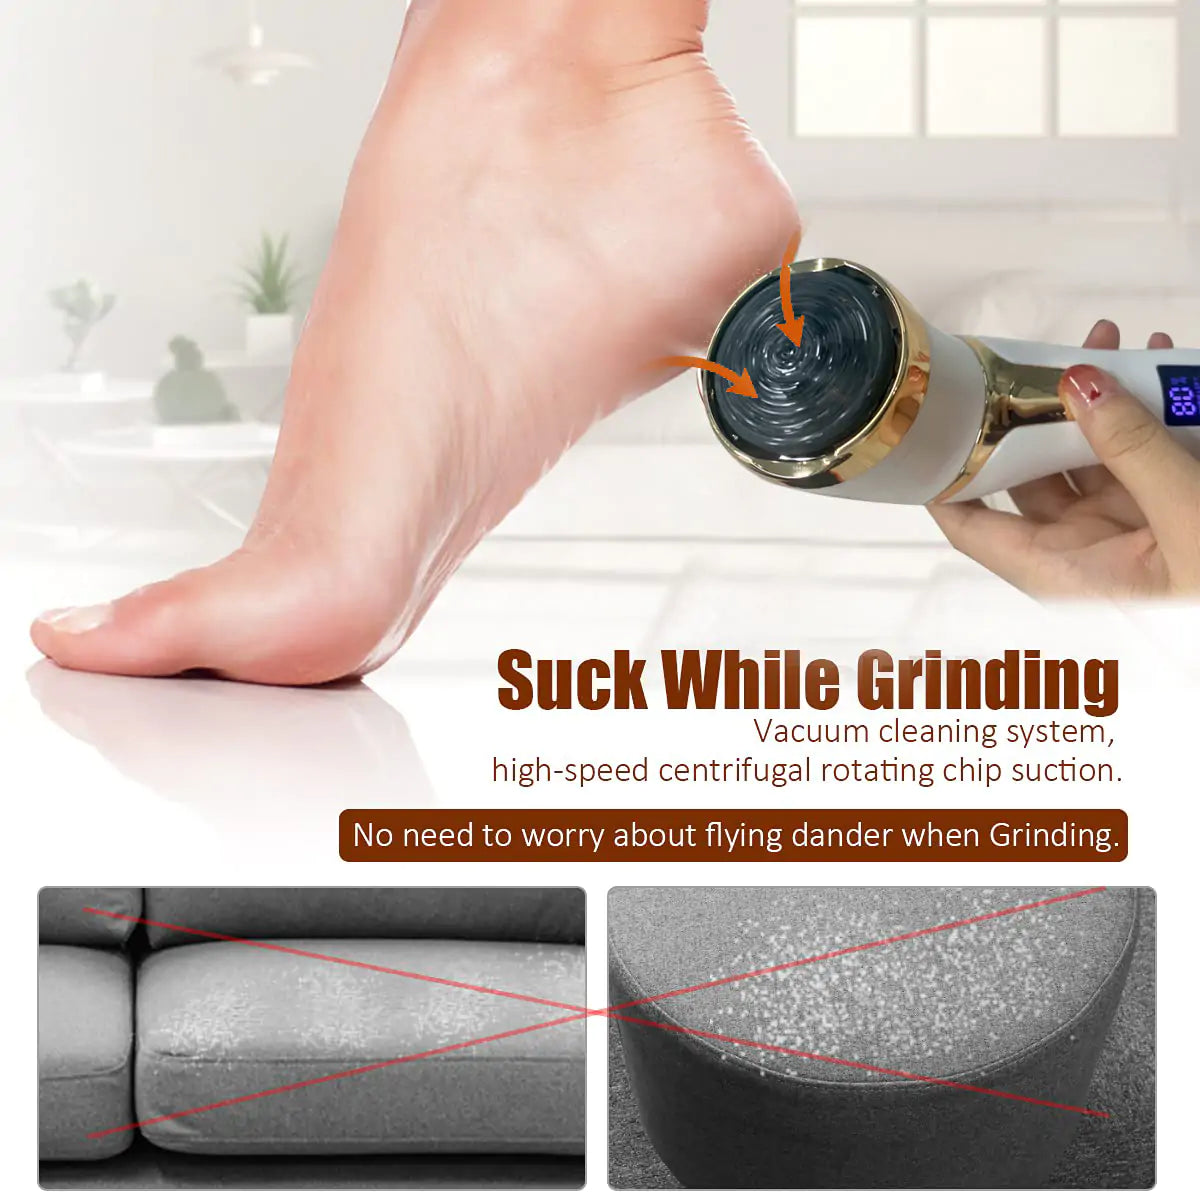 Rechargeable Electric Pedicure Callus Remover – Professional Foot Care and Callus Shaving Tool